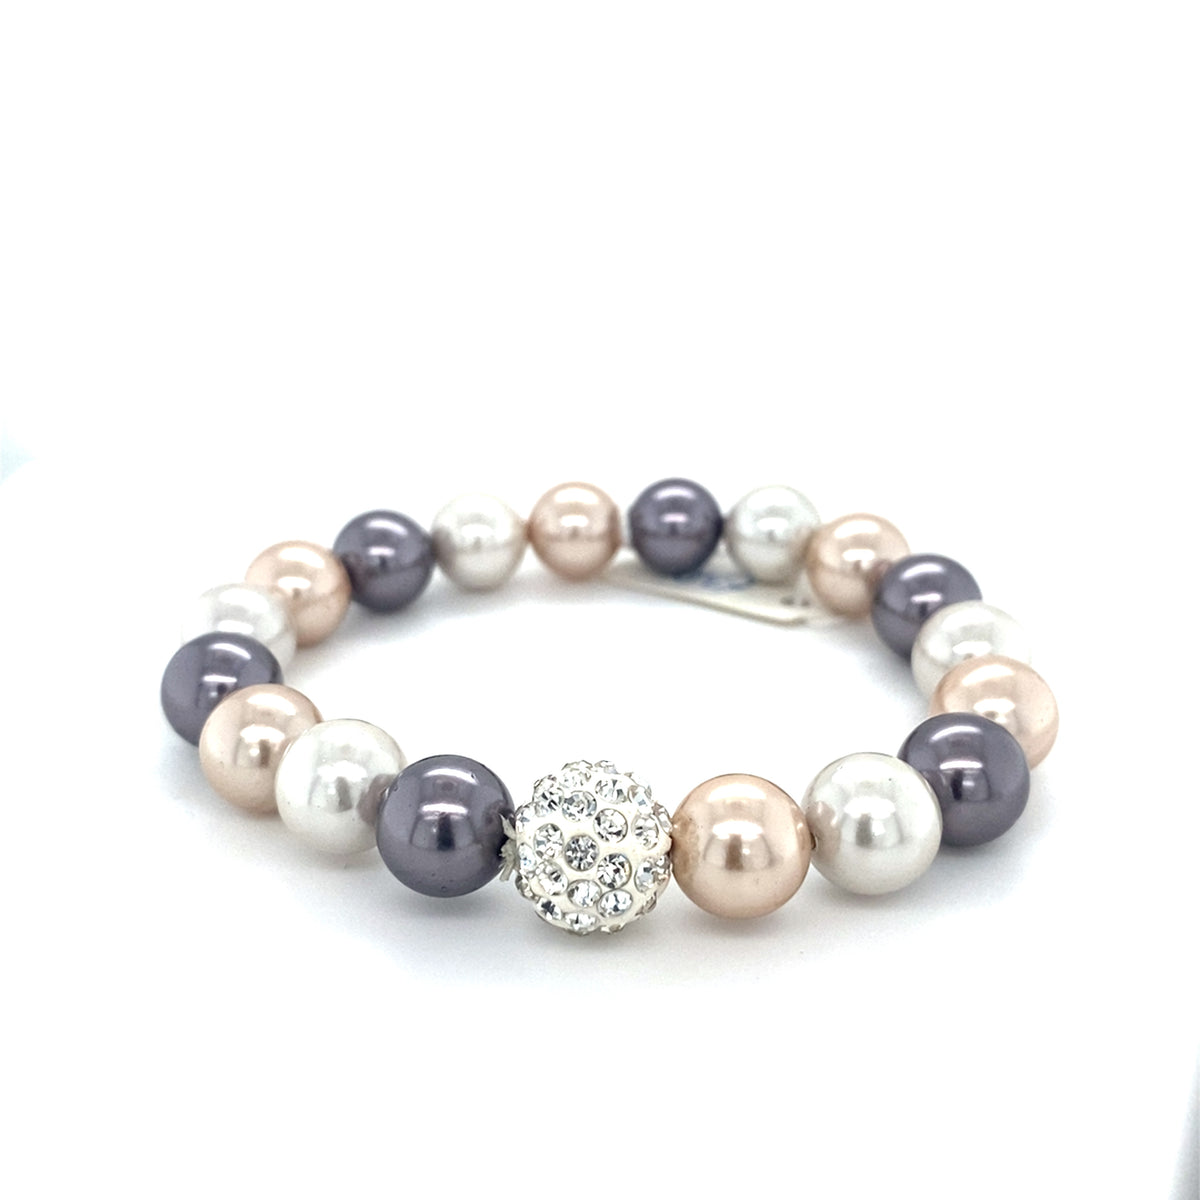 Pearl bracelet with Neutral Tones